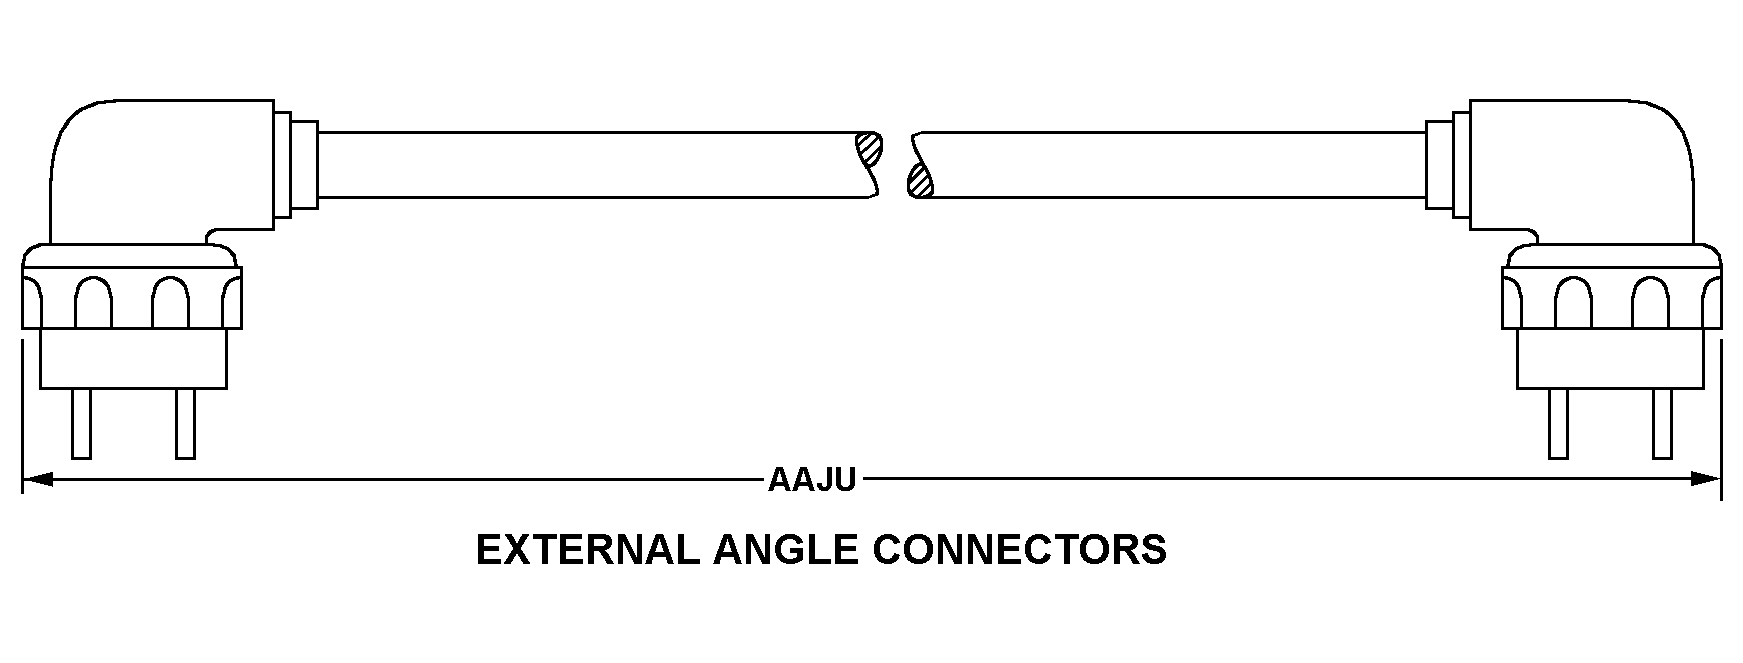 EXTERNAL ANGLE CONNECTORS style nsn 5995-01-324-3540